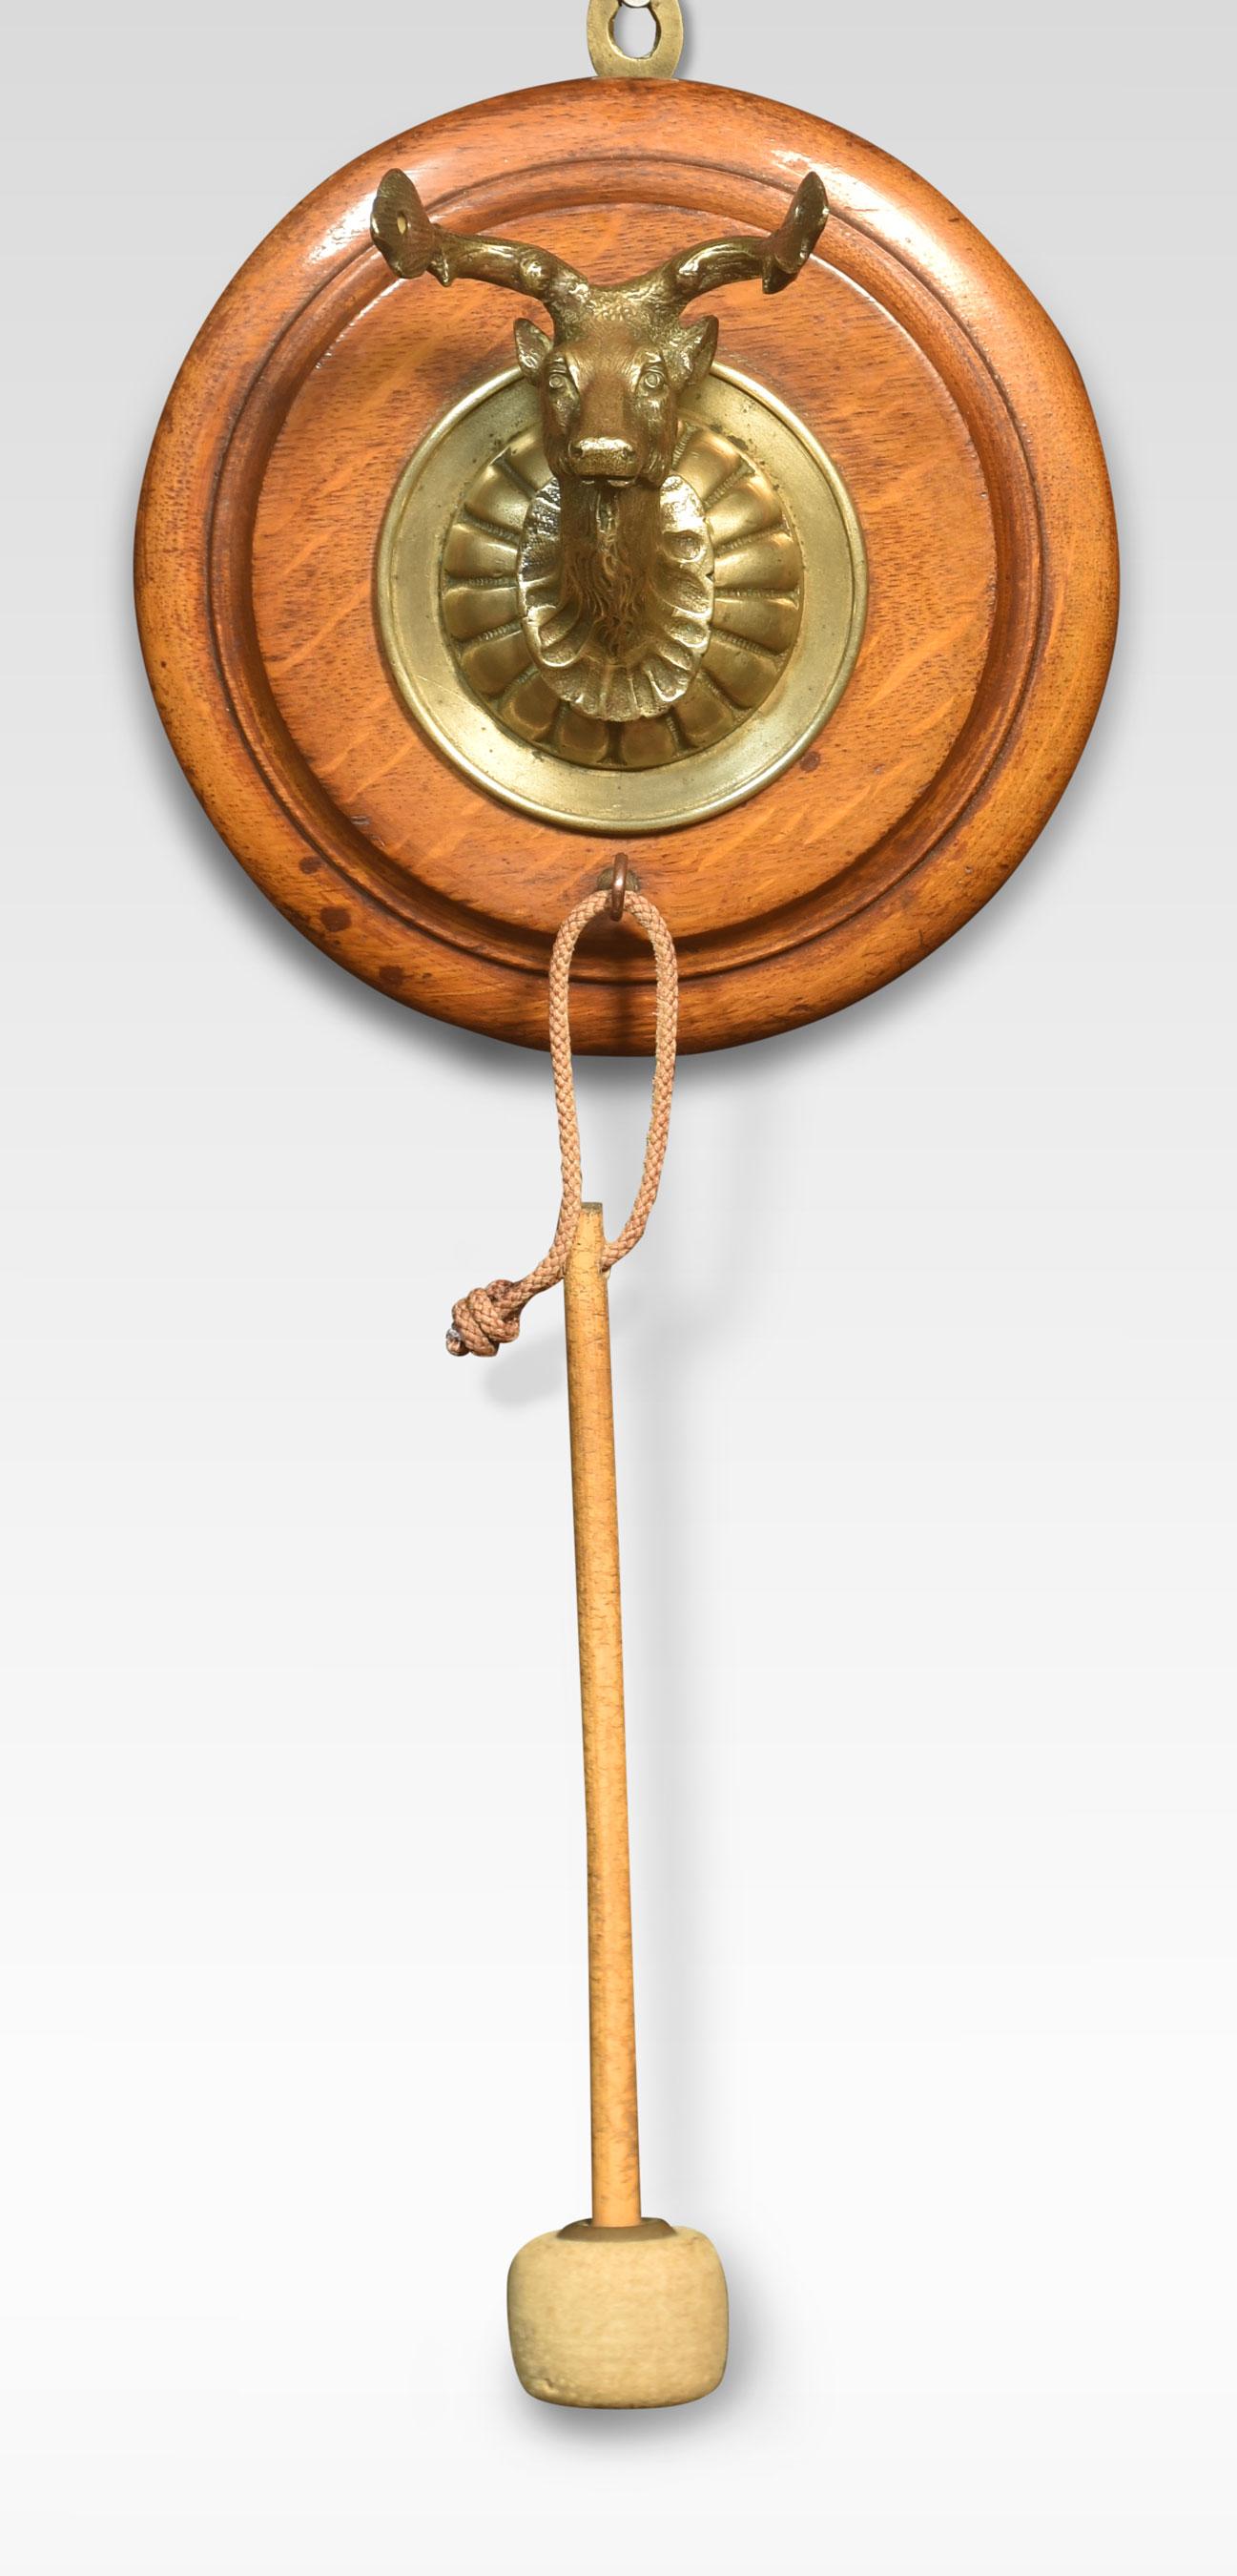 Wall hanging dinner gong, the oak backplate with stags head supporting the circular gong. Together with a hammer.
Dimensions
Height 21 Inches
Width 10 Inches
Depth 6 Inches